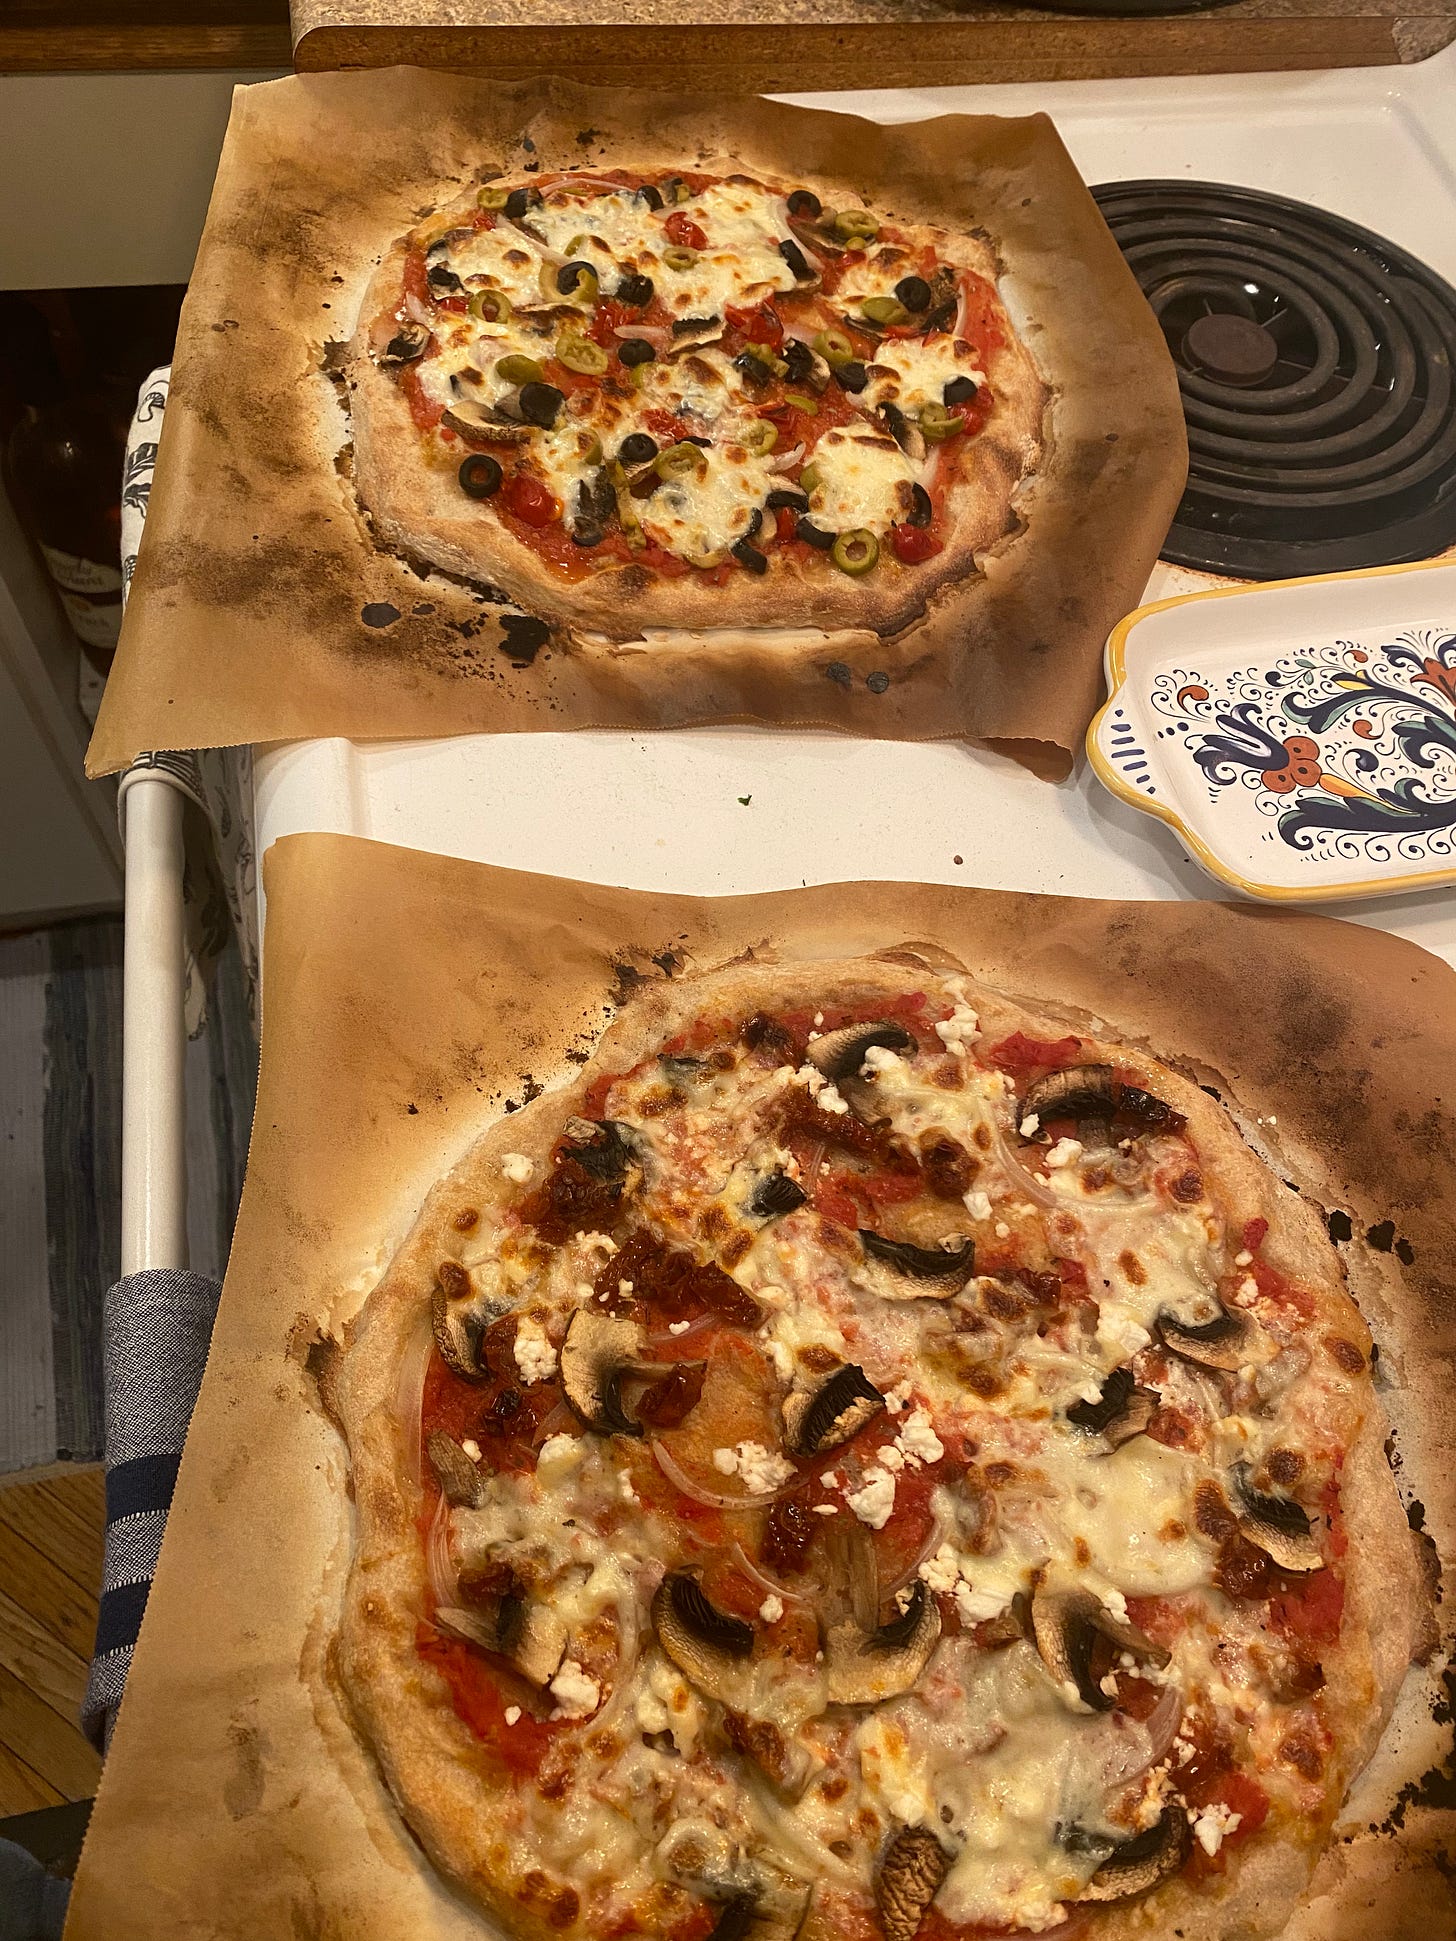 Two pizzas on top of the stove on parchment paper, burned at the edges from the oven. The nearer pizza has mushrooms, feta, and sun-dried tomato, and the one in the background has mushrooms and black & green olive slices.